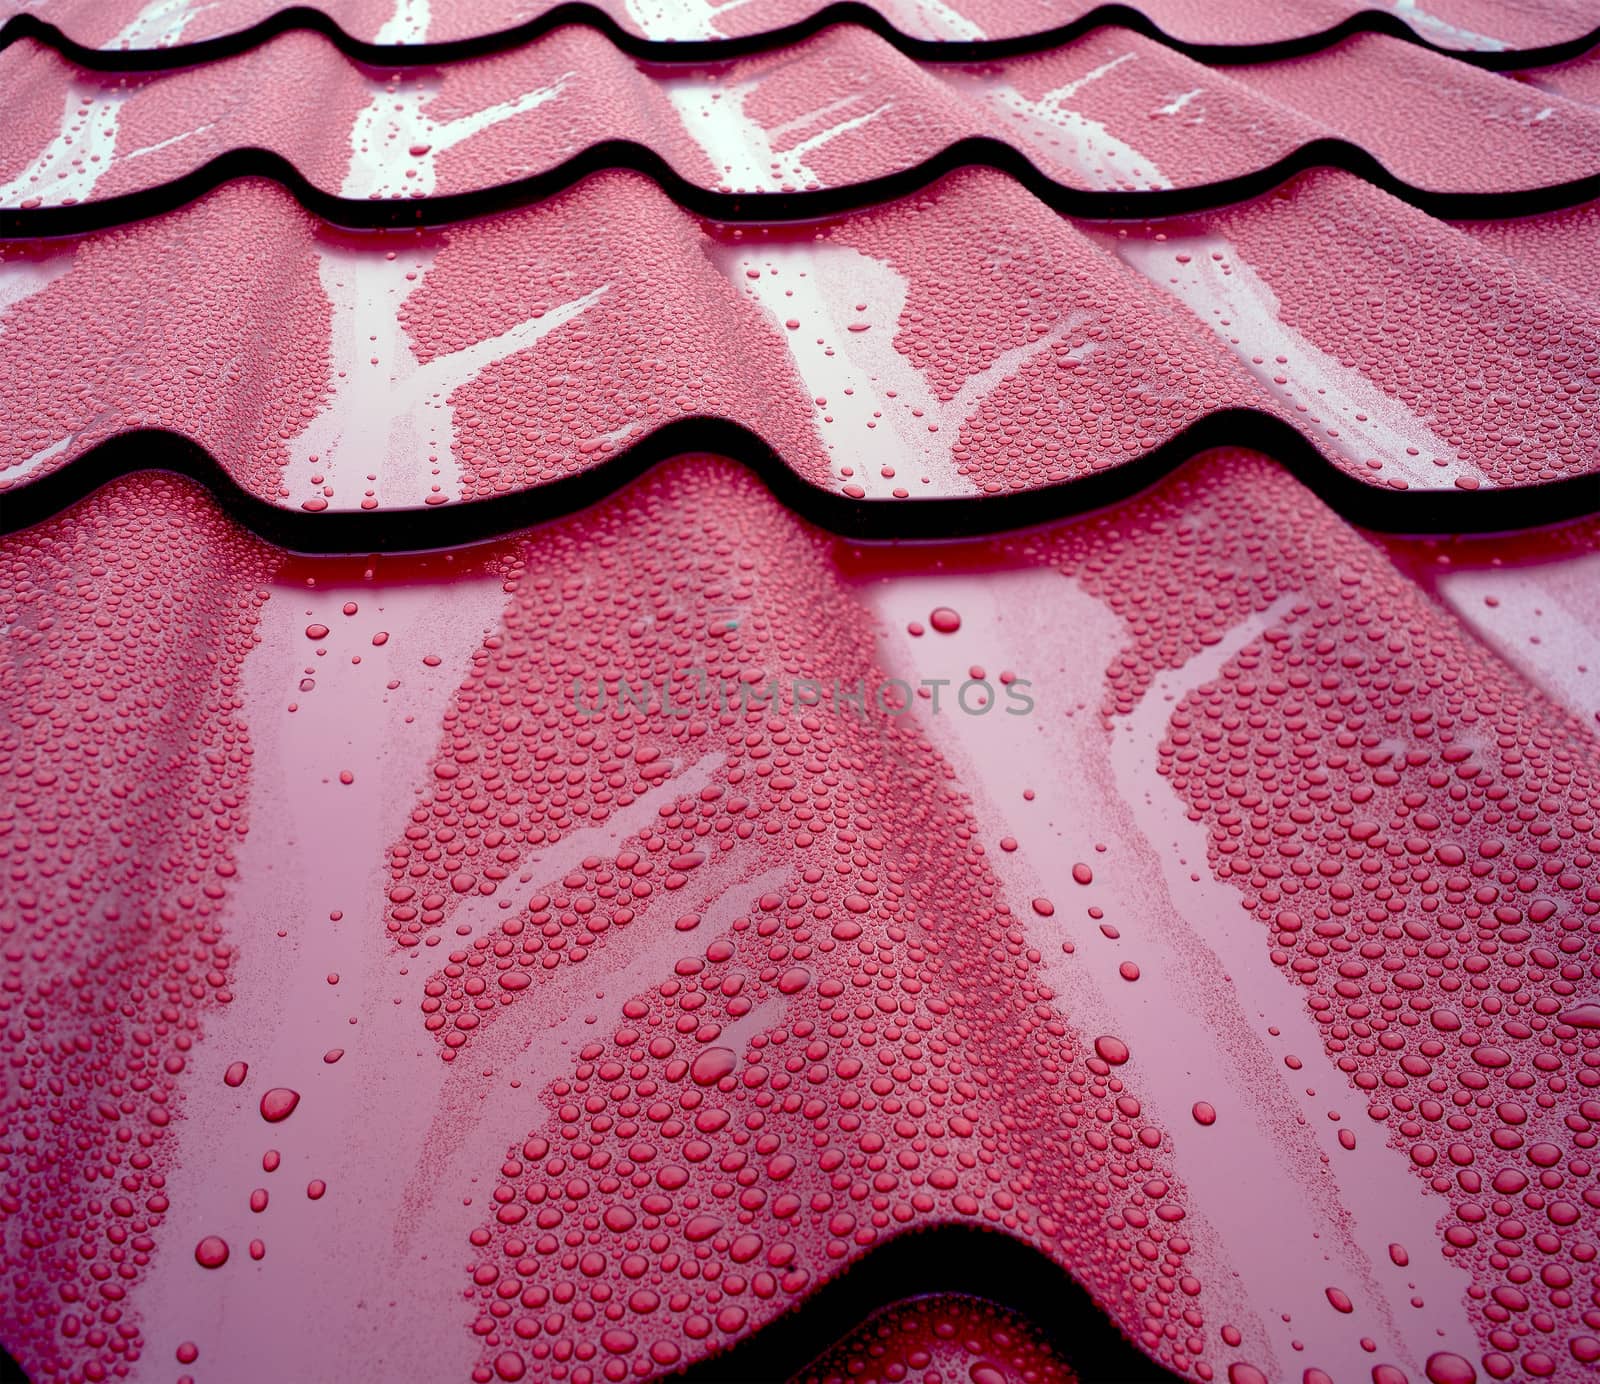 General view of wet metal roof shingles, protecting house from rain and mud